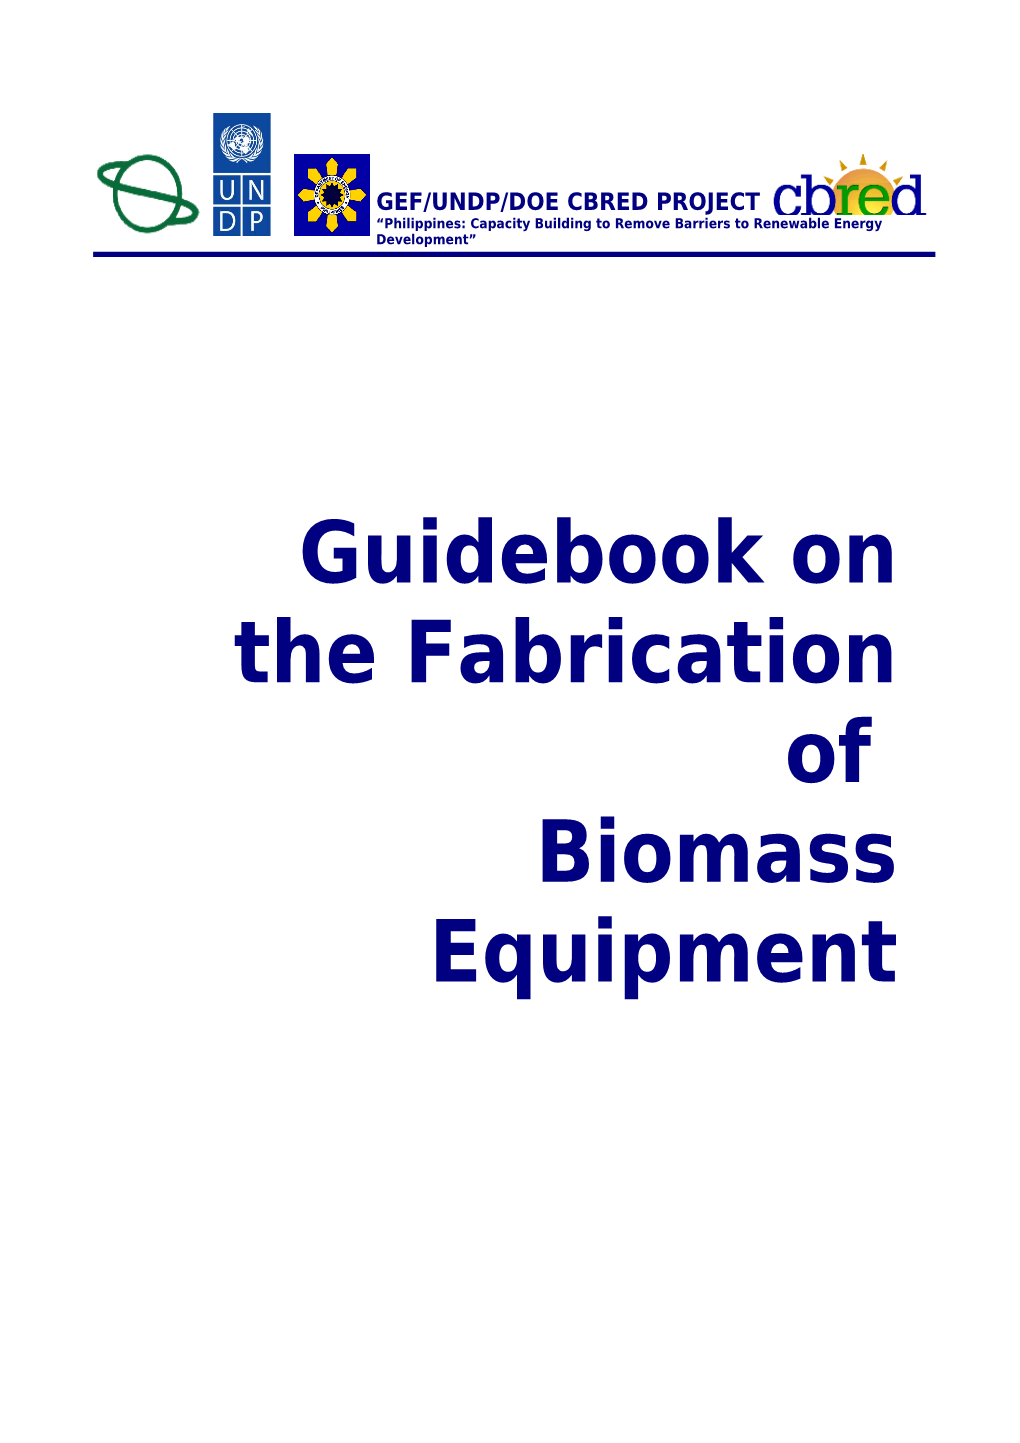 Guidebook for the Fabrication of Biomass Equipment